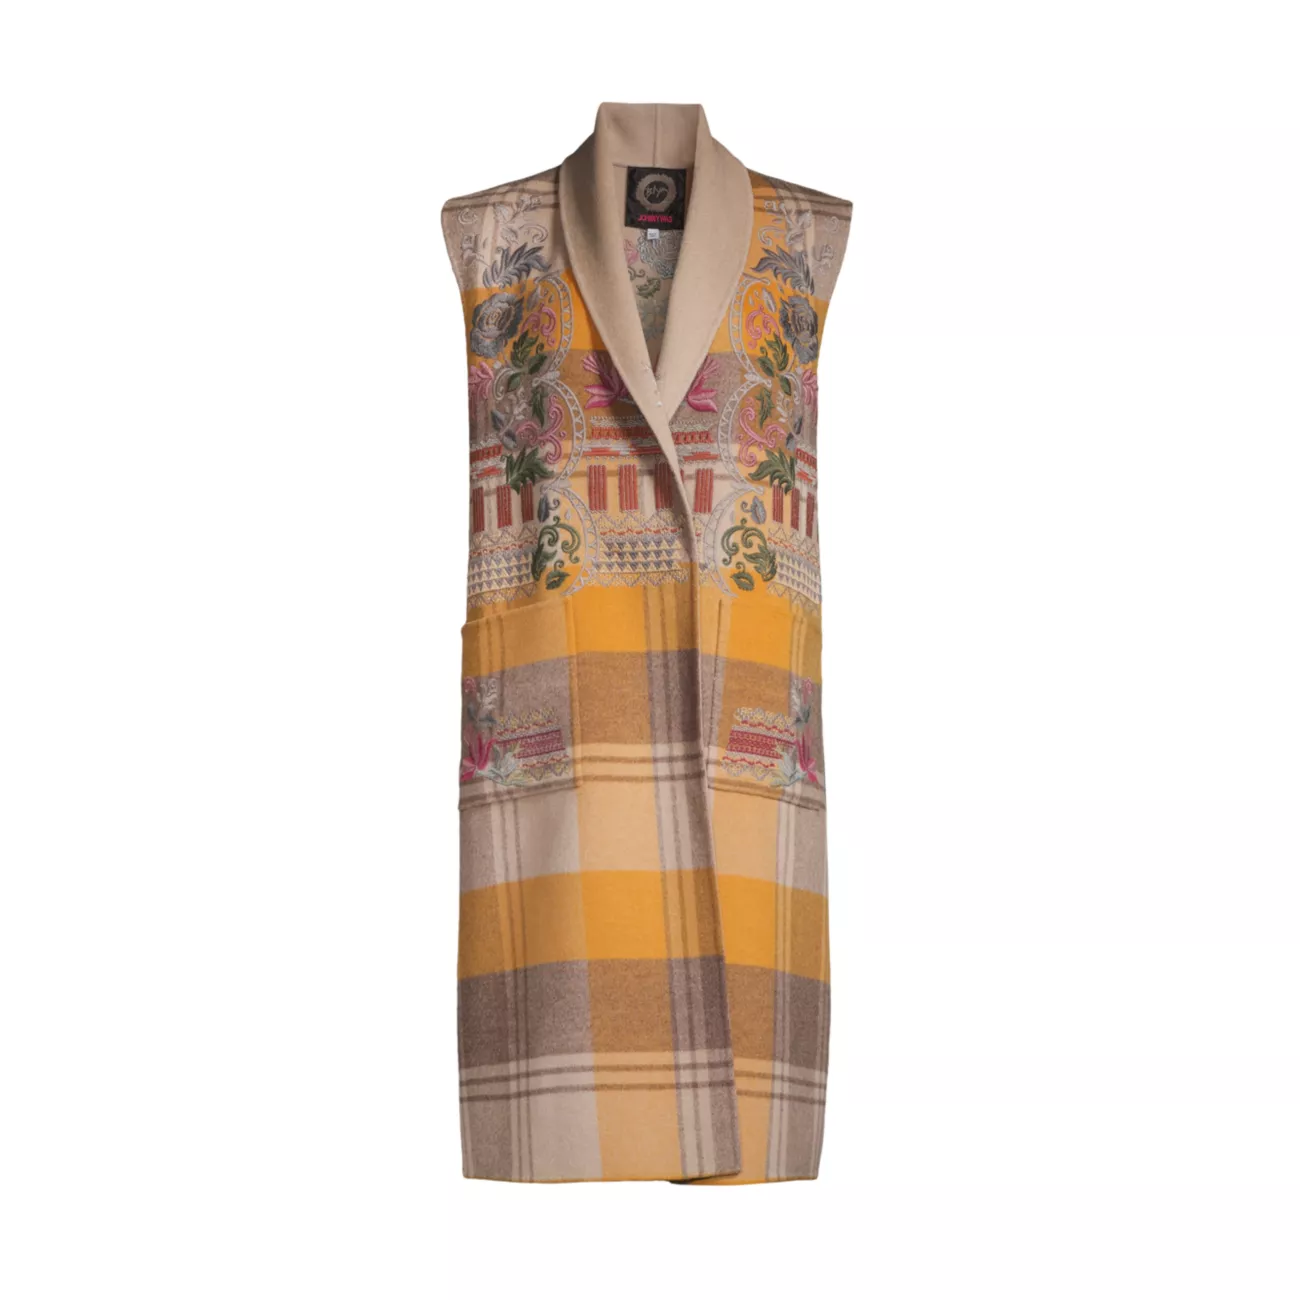 Molly Embroidered Plaid Vest Johnny Was